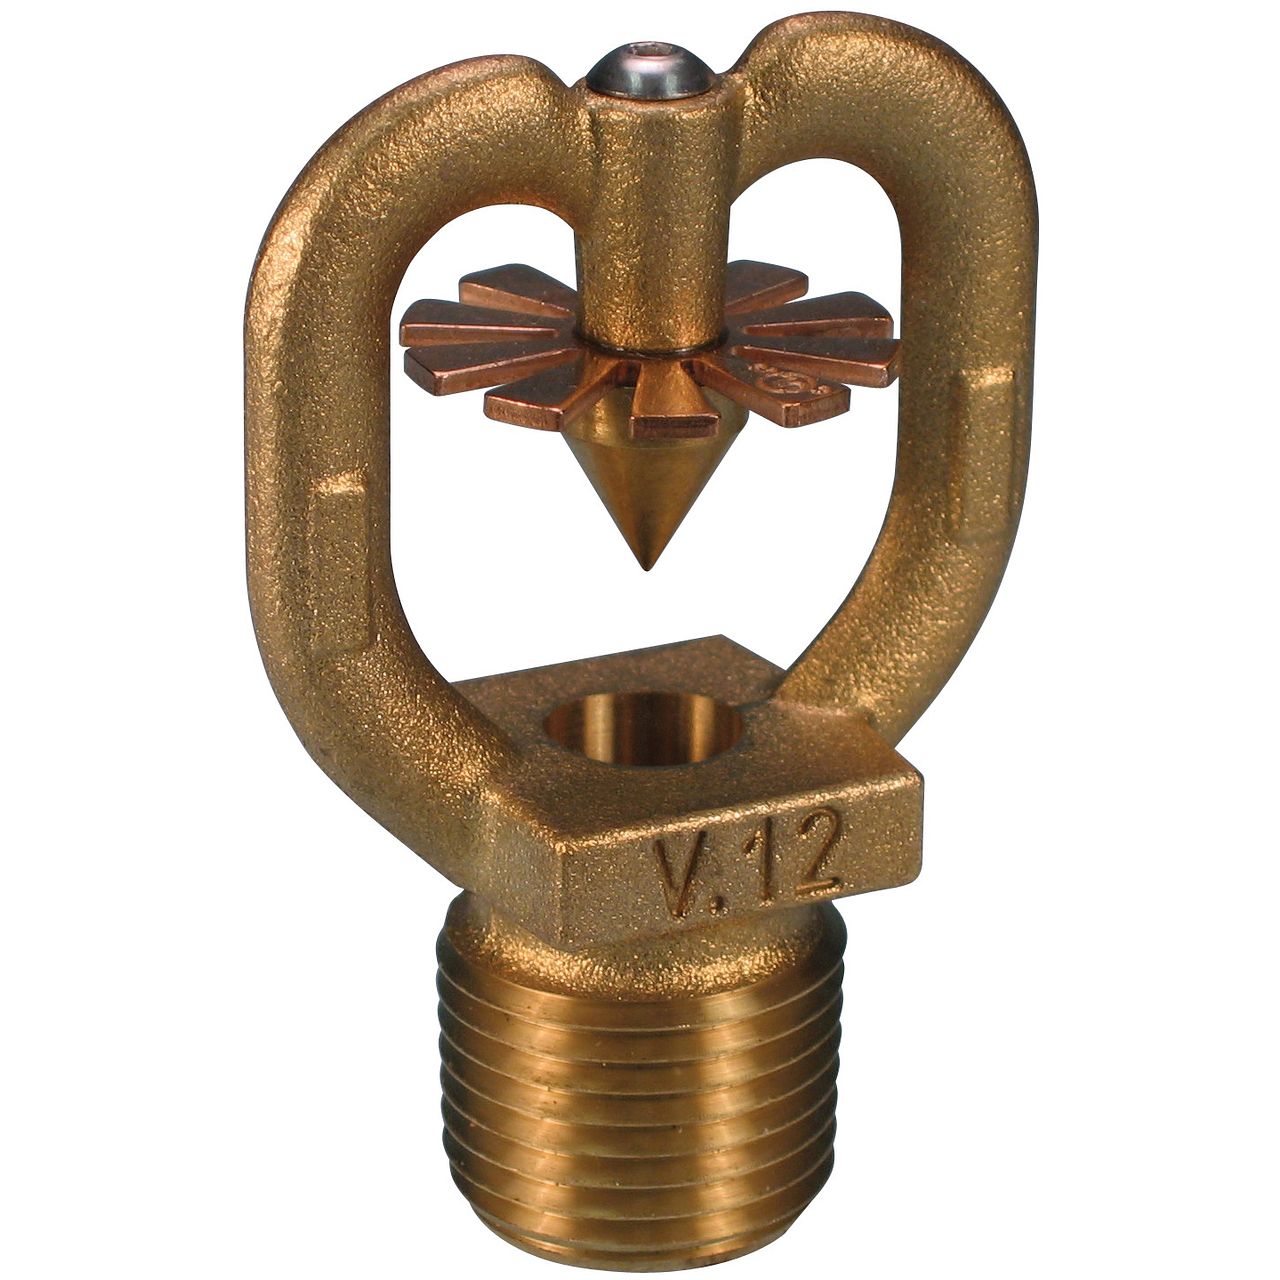 FireLock™ Series FL-SA/NZ Directional Nozzles - Nozzle Fire Sprinklers